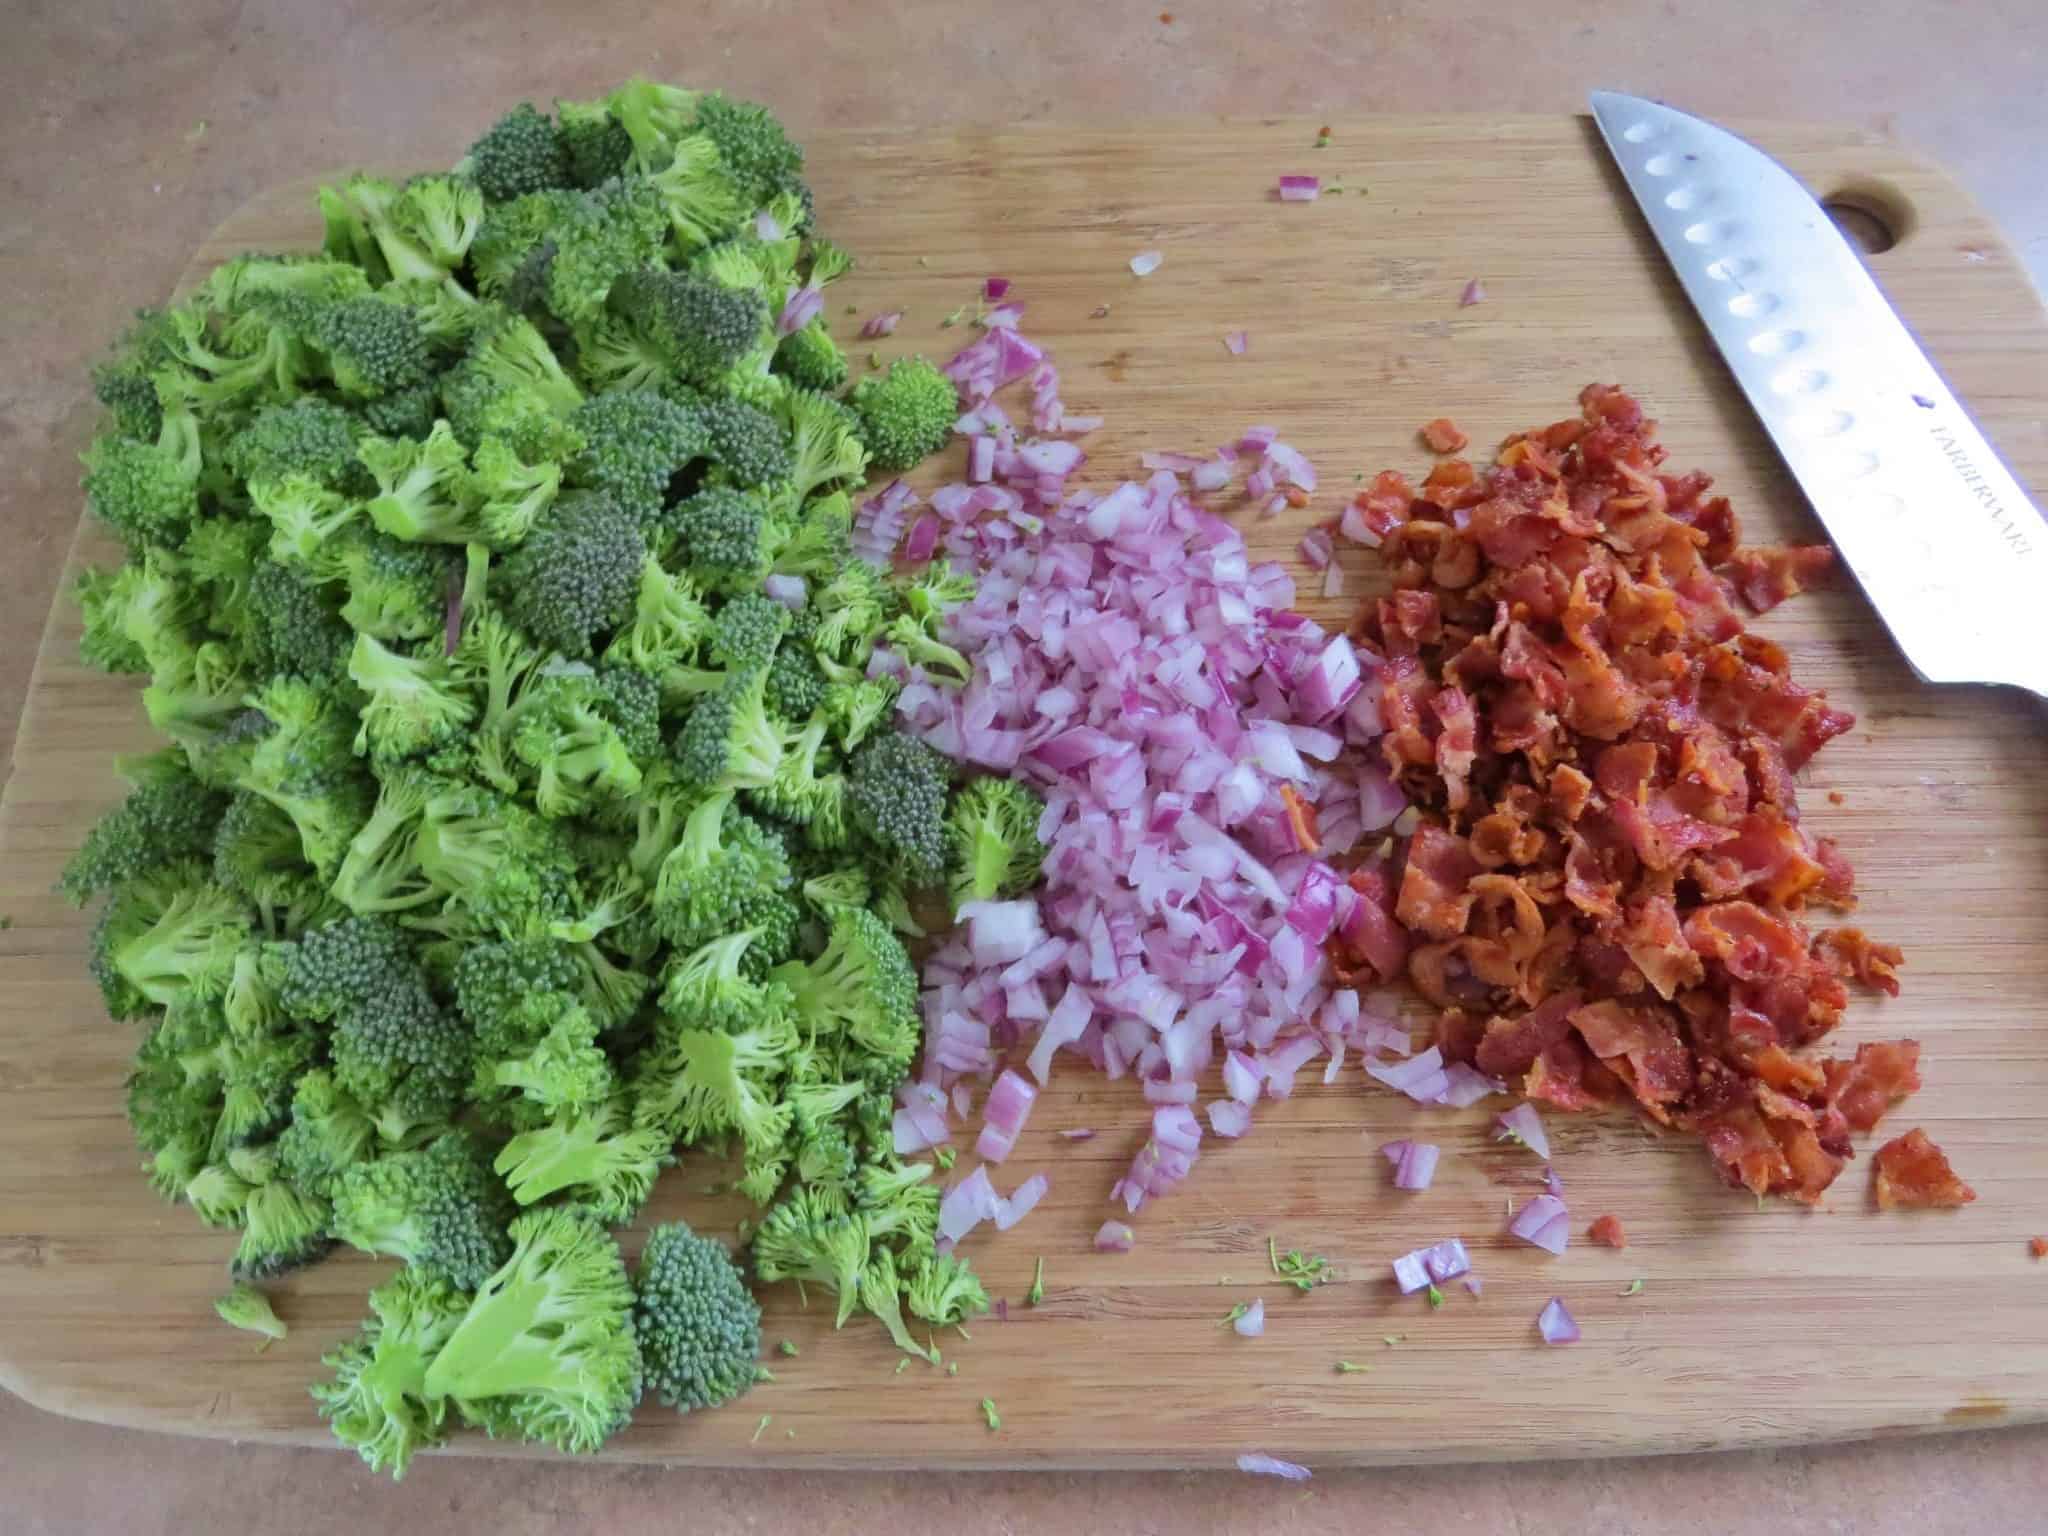 chopped broccoli, diced red onion, crumbled and cooked bacon on a wooden chopping board with knife.